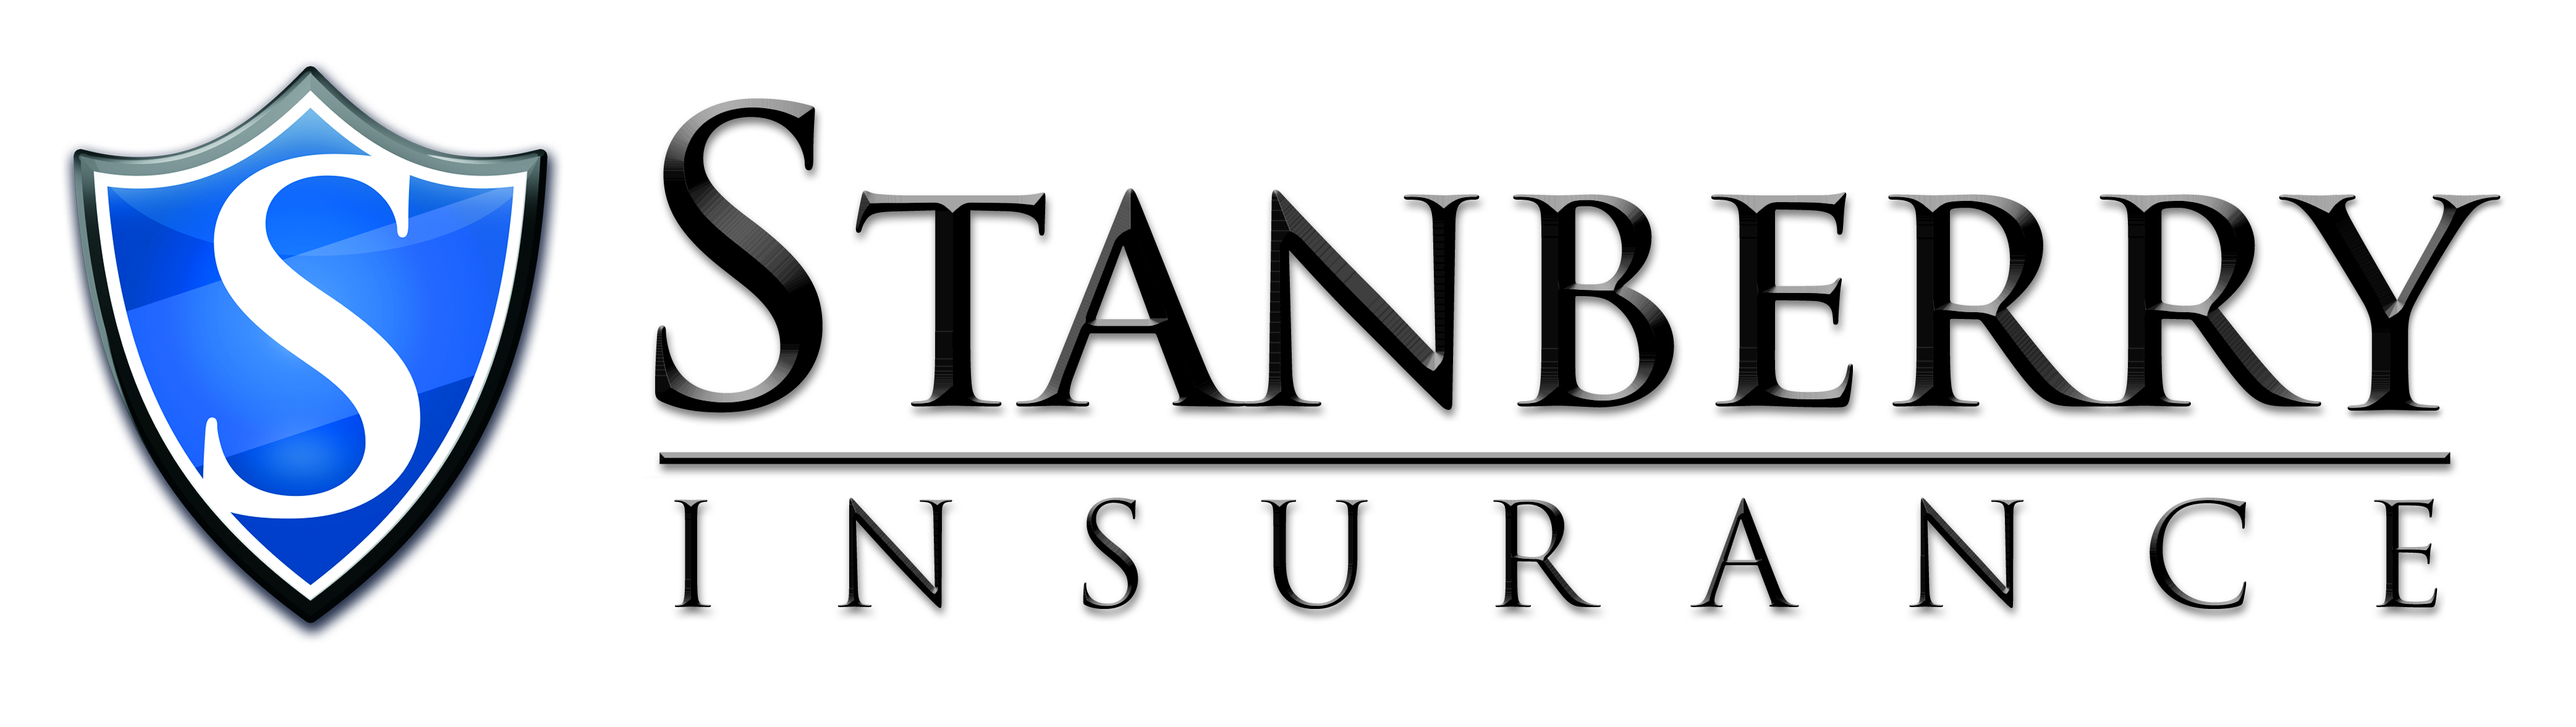 Stanberry Insurance Pin Sponsor-$500